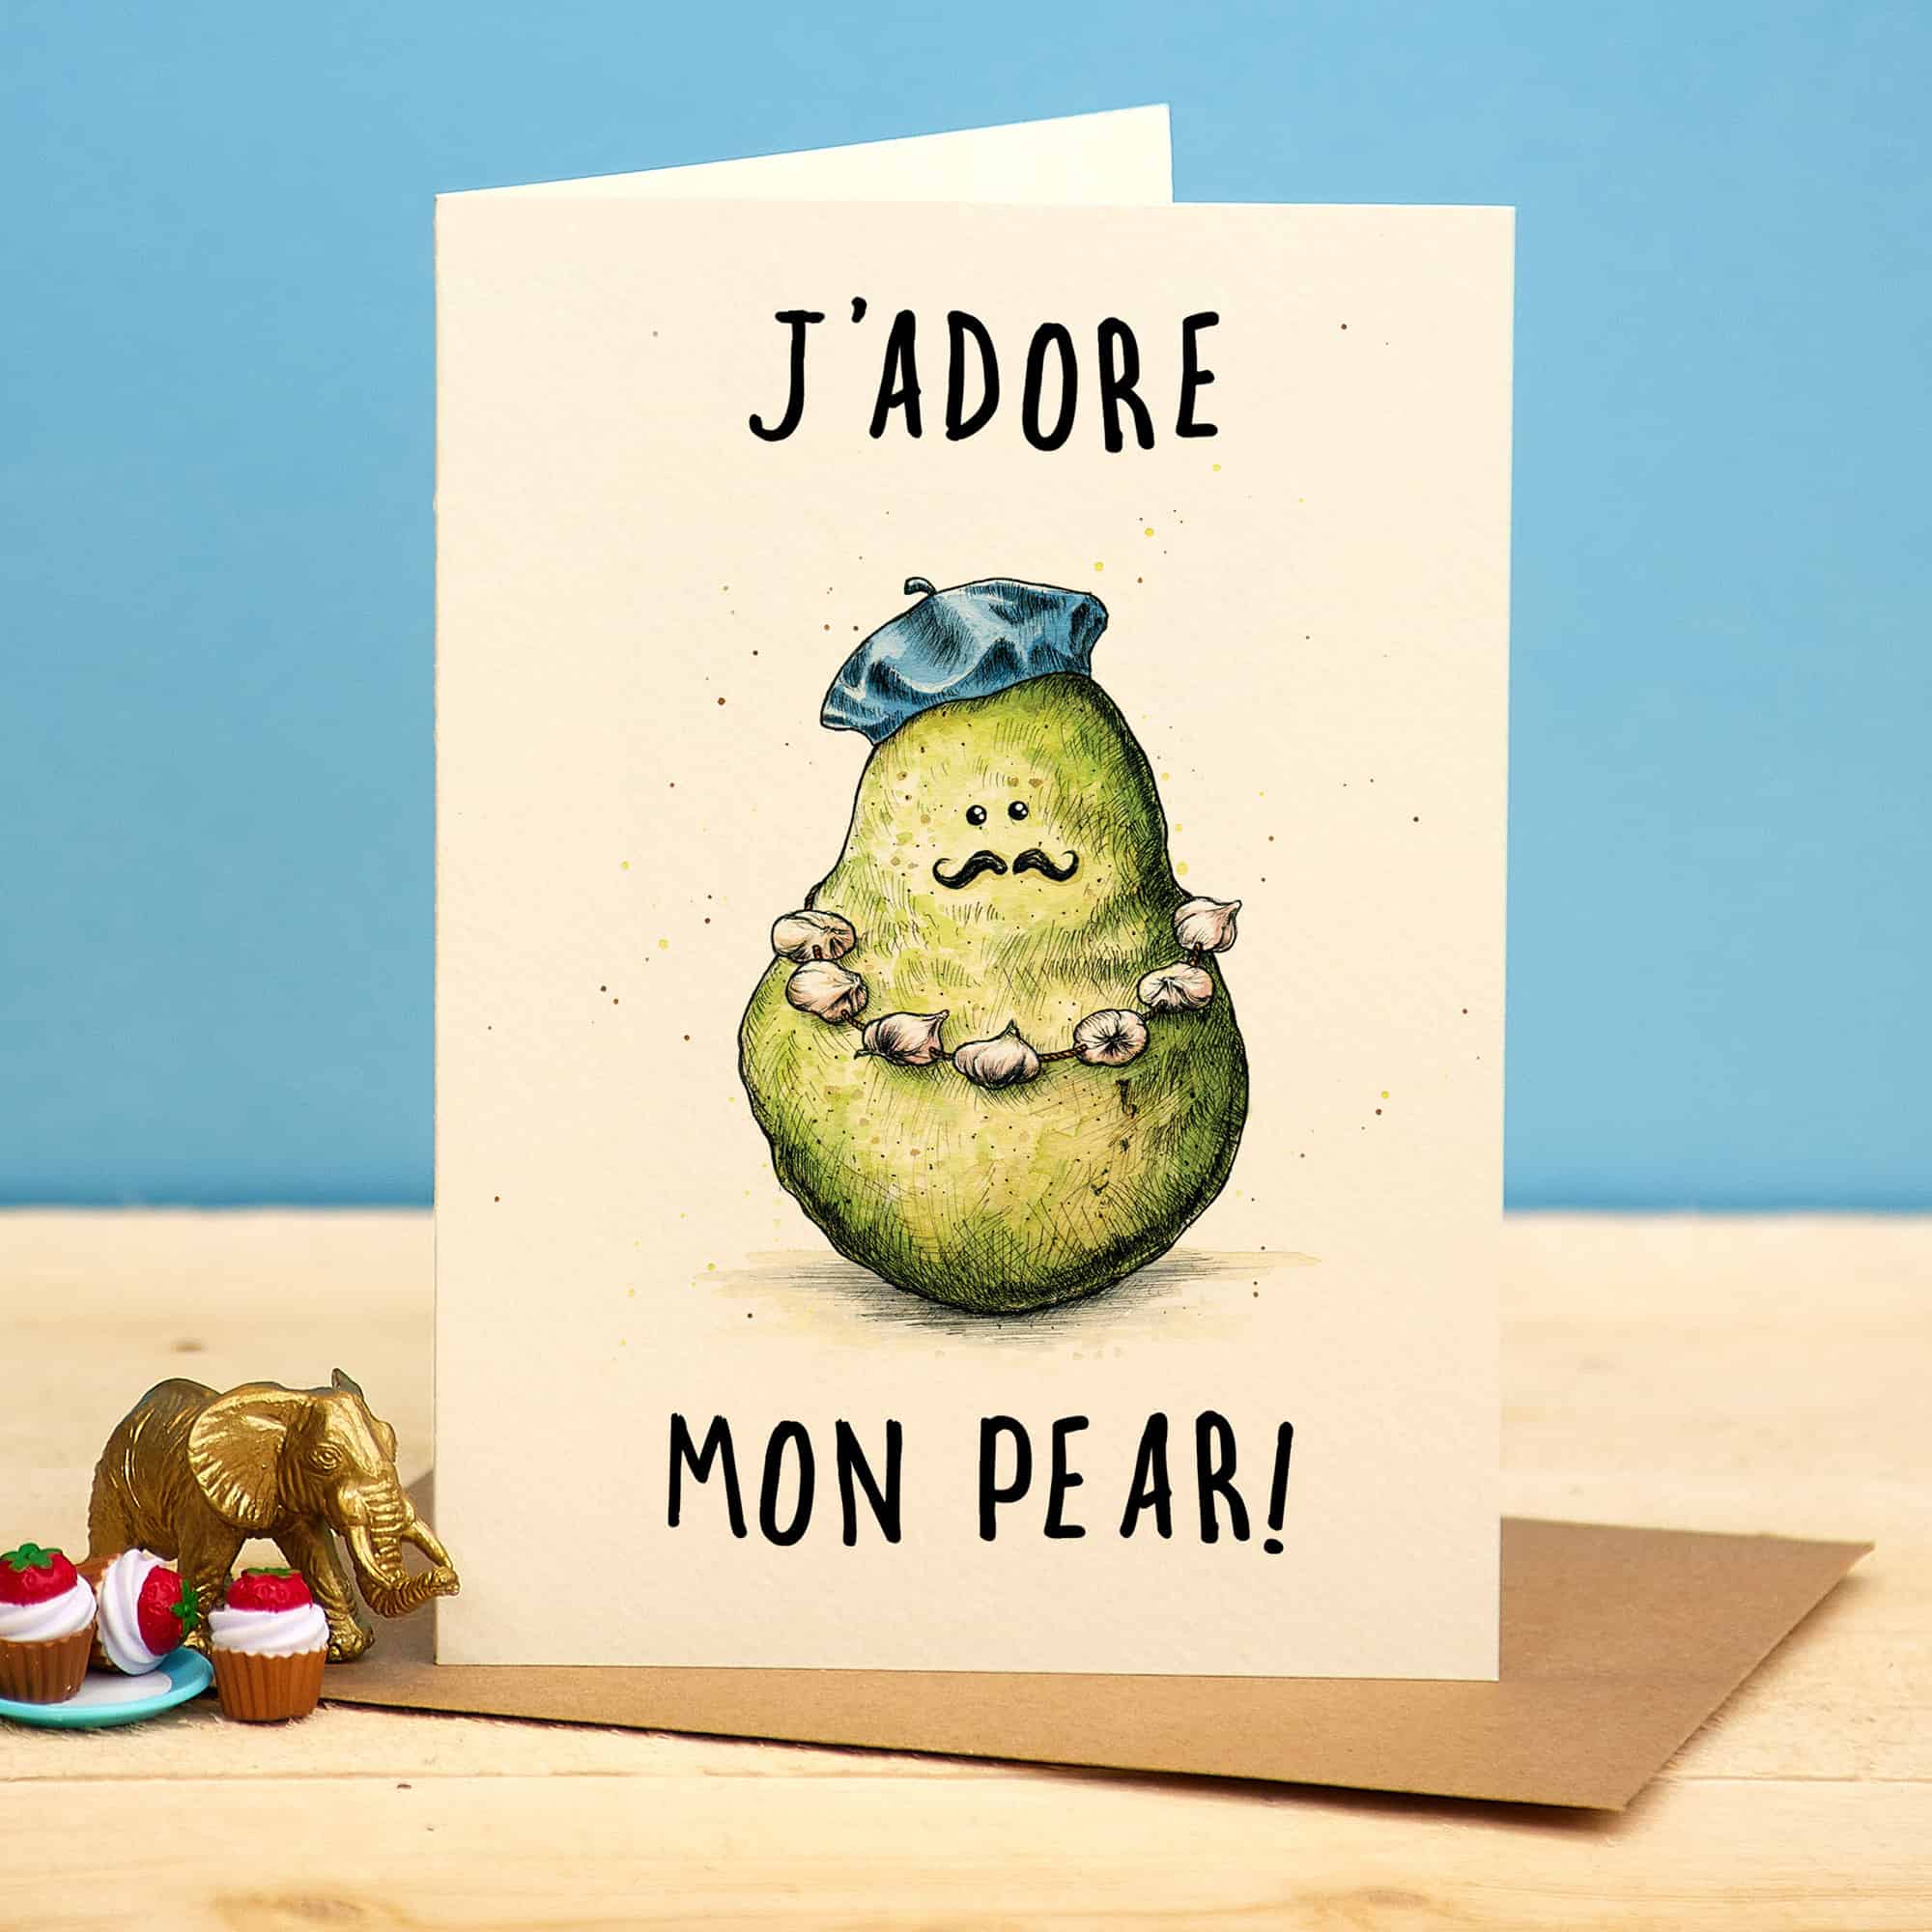 J'adore Mon Pear Card by Bewilderbeest